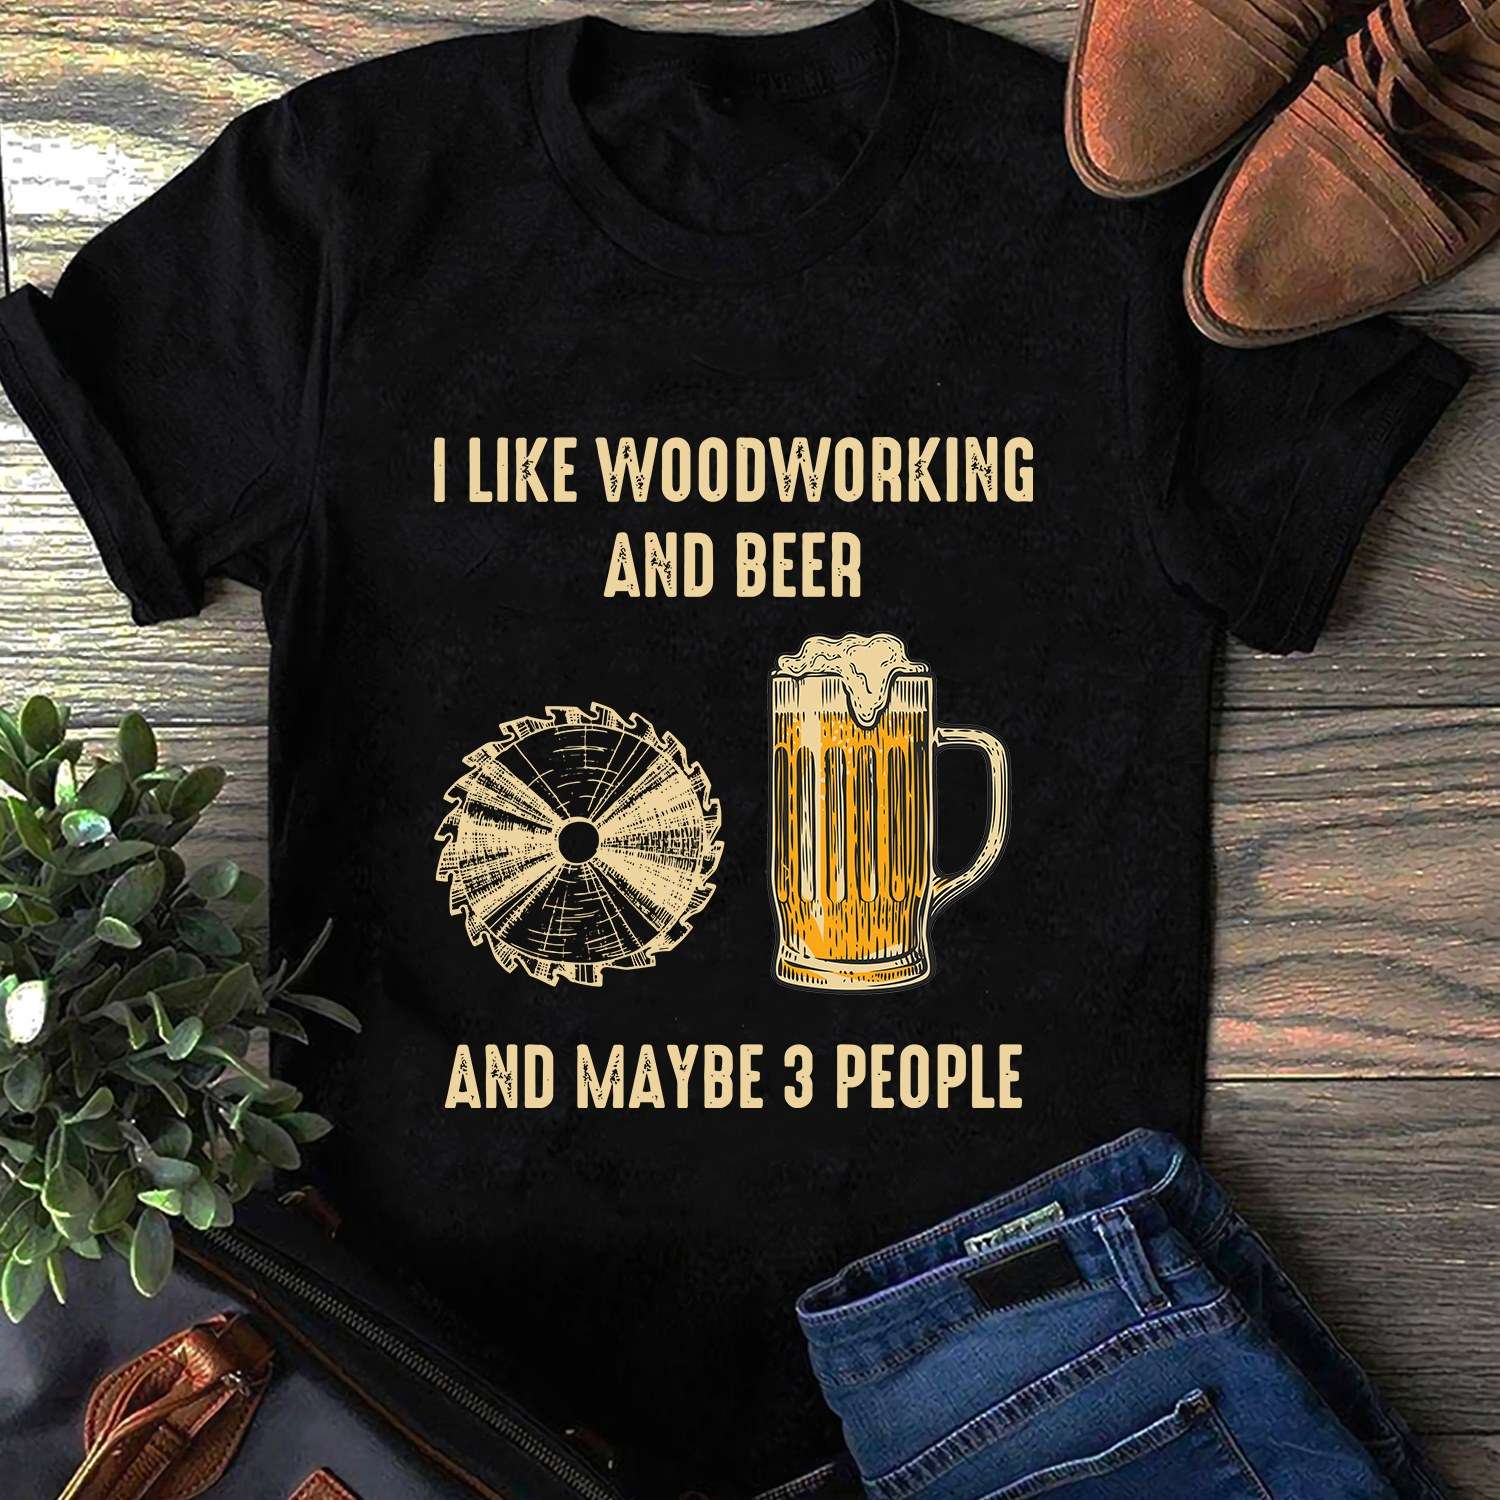 Woodworking Machinery And Beer Glass - I like woodworking and beer and maybe 3 people